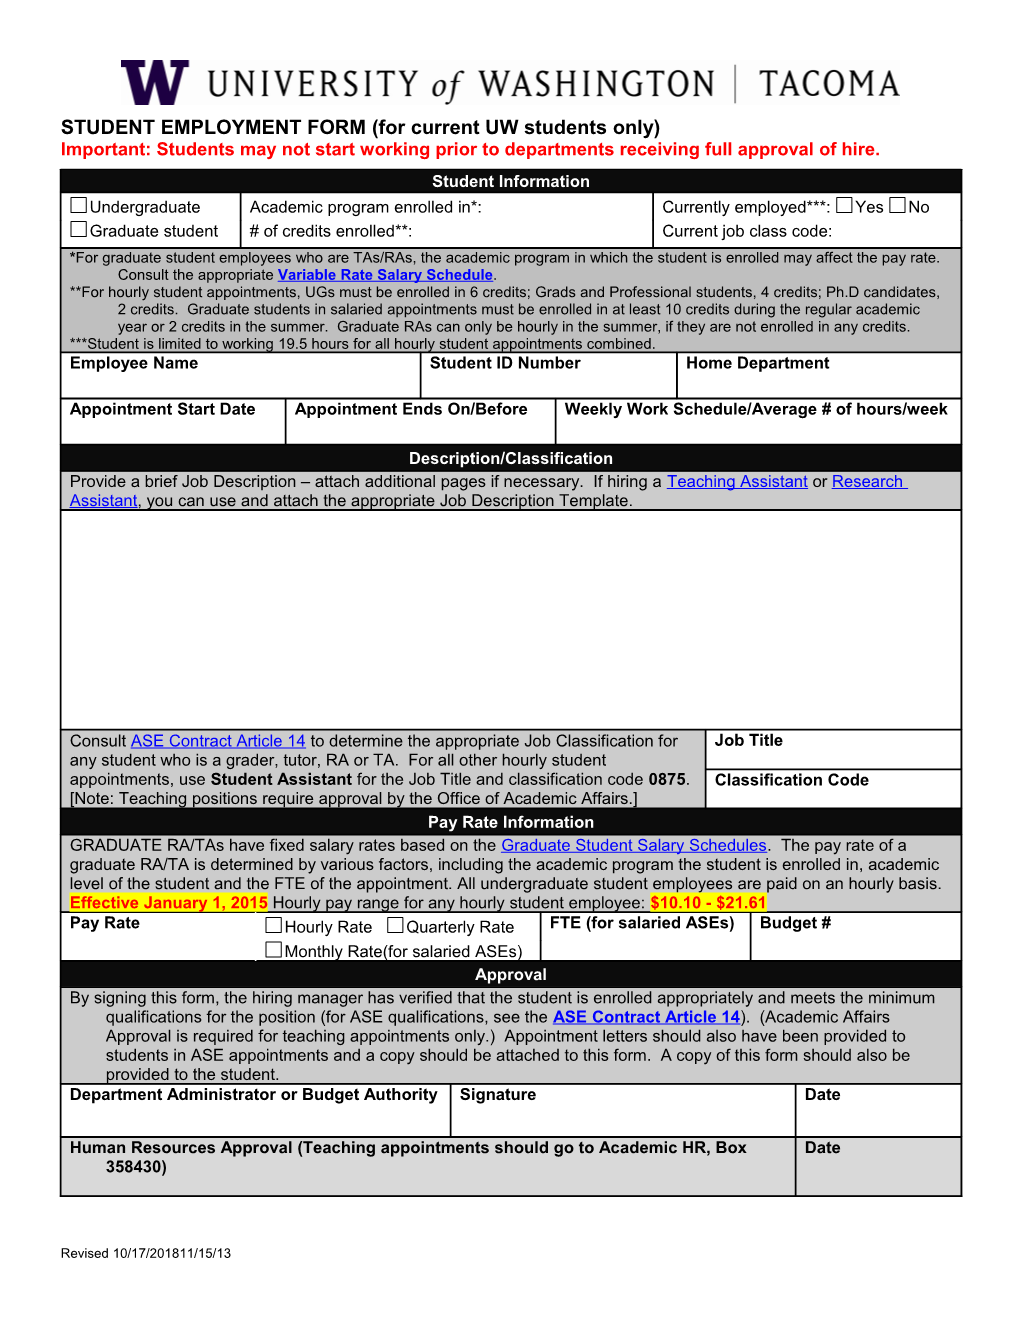 STUDENT EMPLOYMENT FORM(For Current UW Students Only)